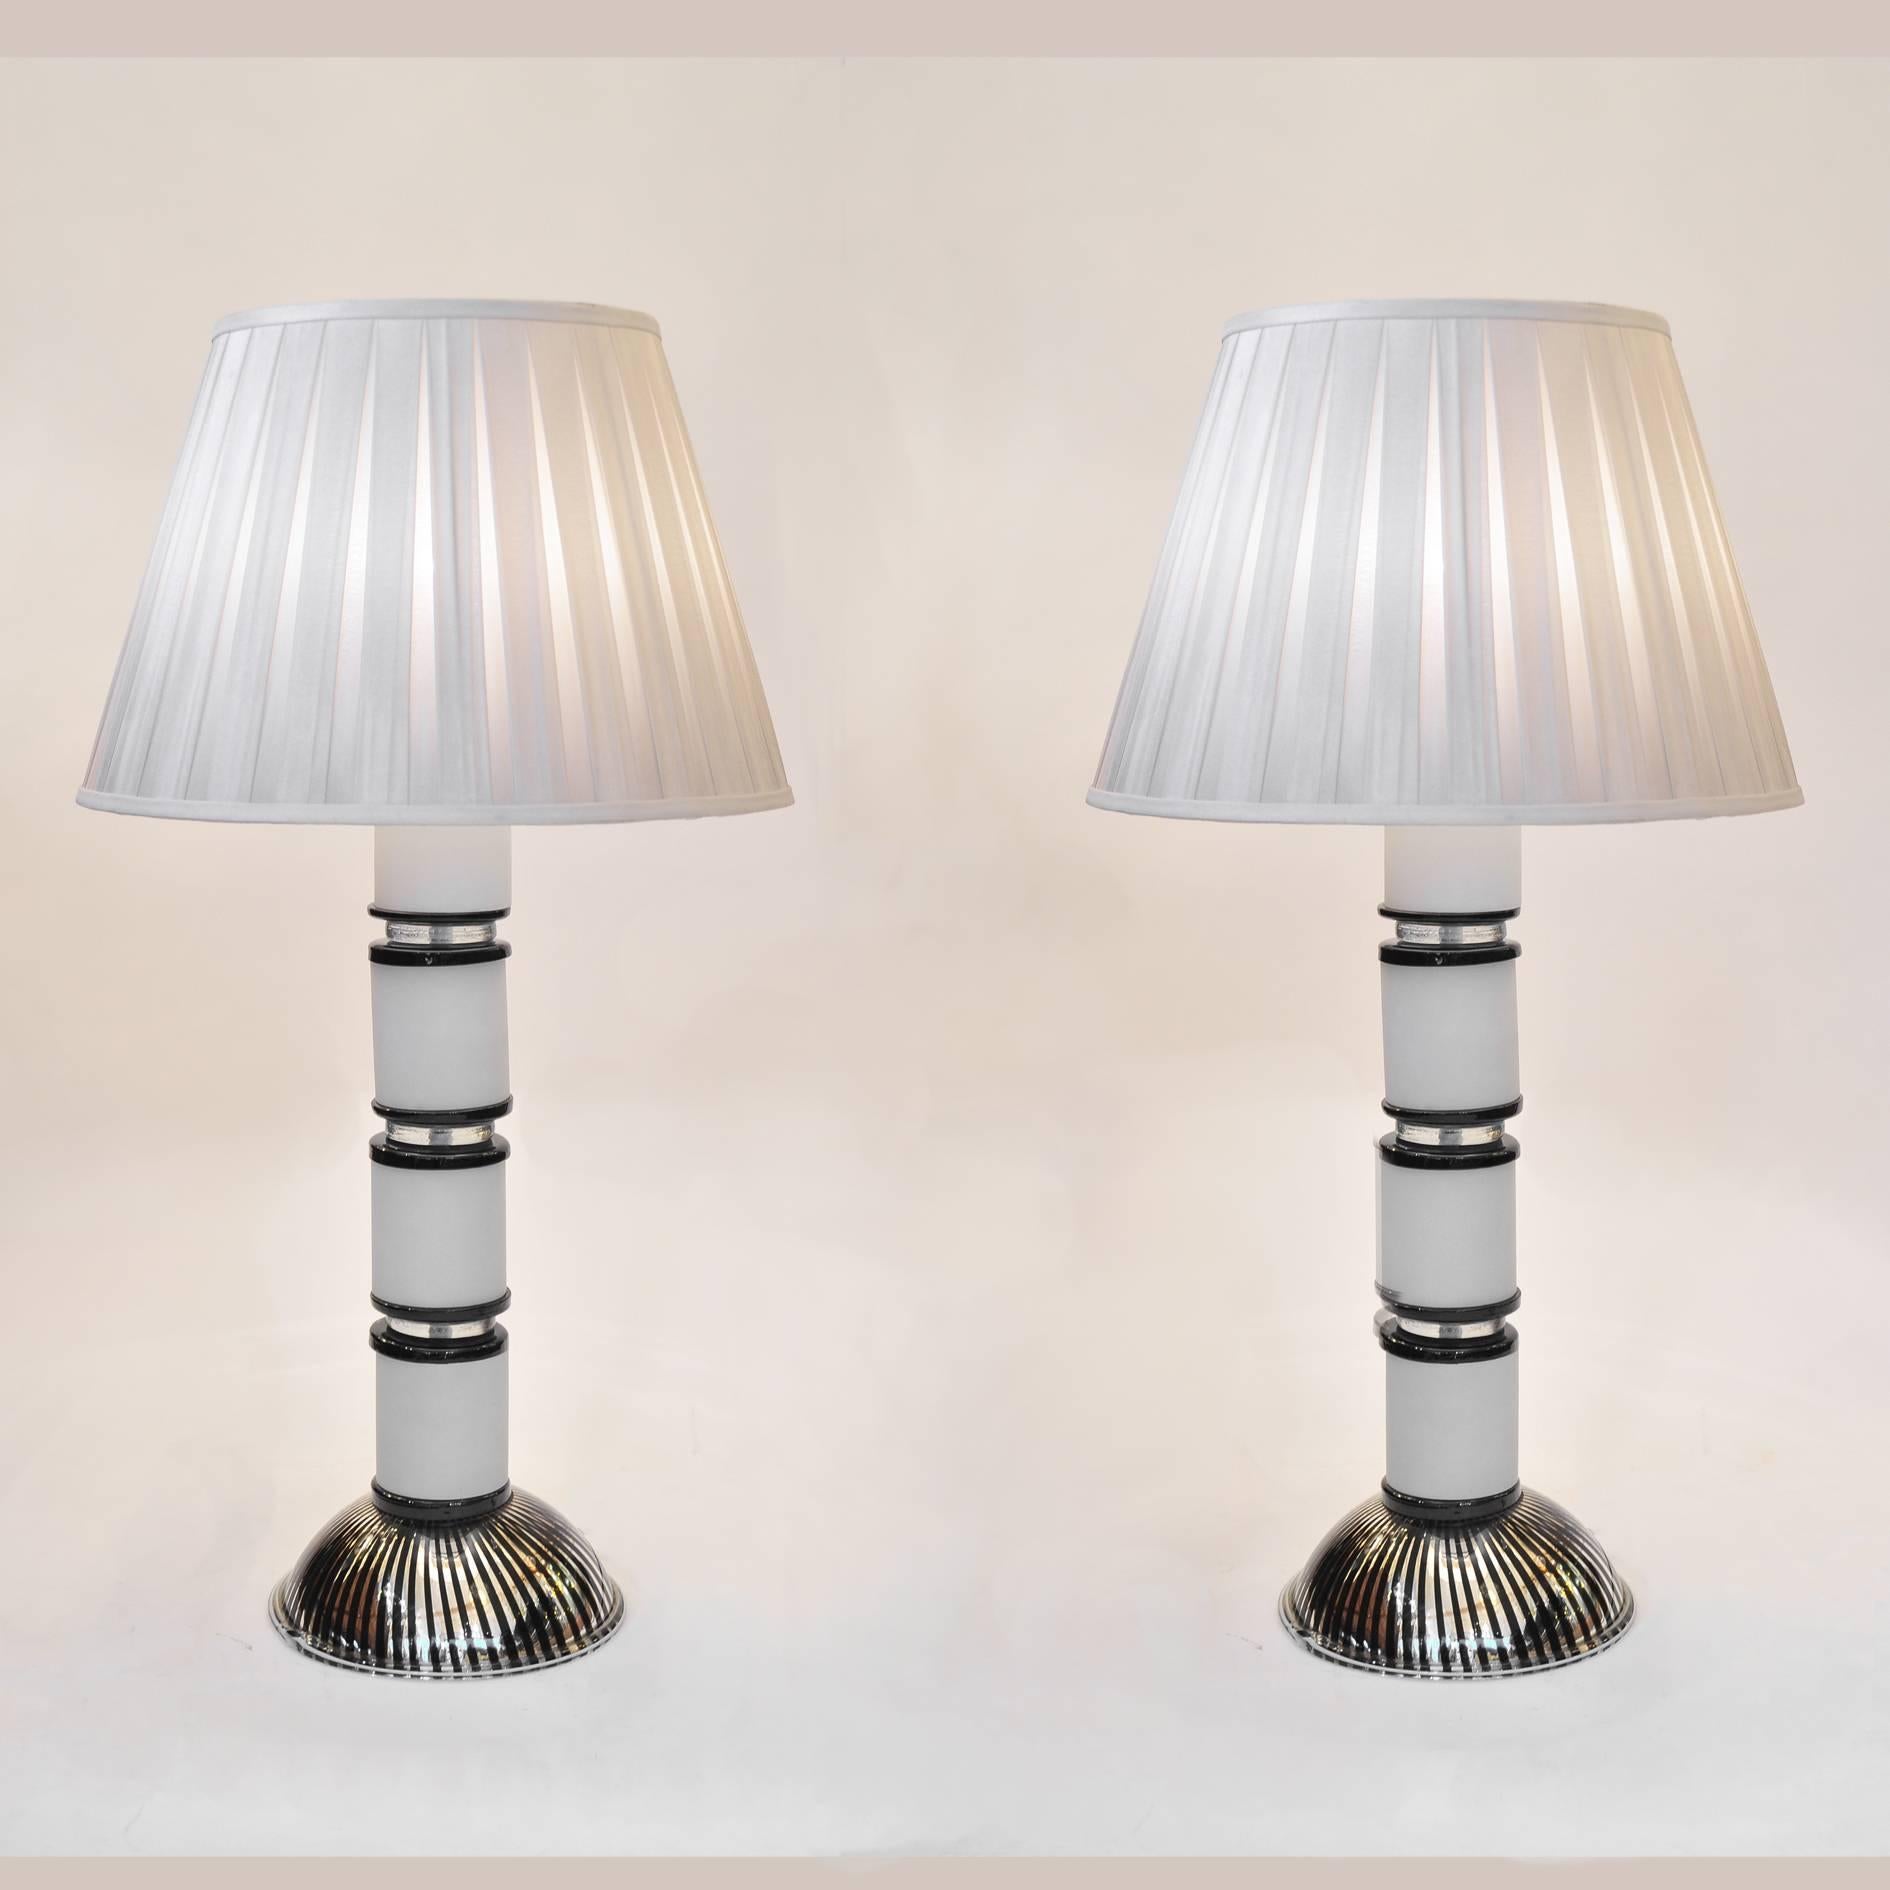 Substantial pair of Italian 1970s glass table lamps. Each piece has four white glass cylinders interspersed with black and clear glass disks sitting on a semi-circular black and silver striped base.